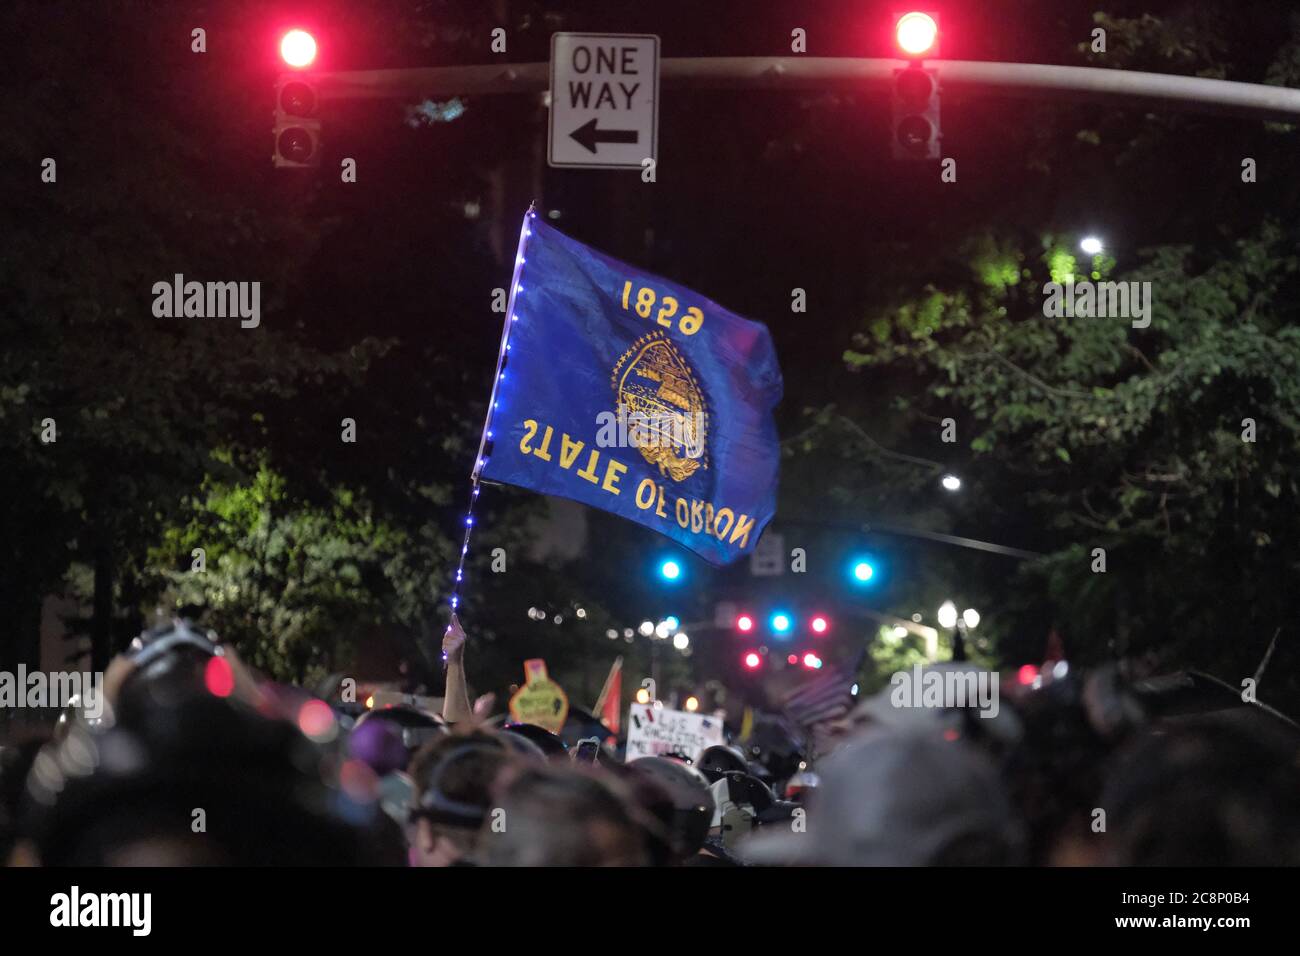 Portland, USA. 26th July, 2020. An upside-down Oregon flag is held in the air as protesters fill the streets demanding that federal officers leave the federal courthouse in Portland, Ore., on July 26, 2020. (Photo by Alex Milan Tracy/Sipa USA) Credit: Sipa USA/Alamy Live News Stock Photo